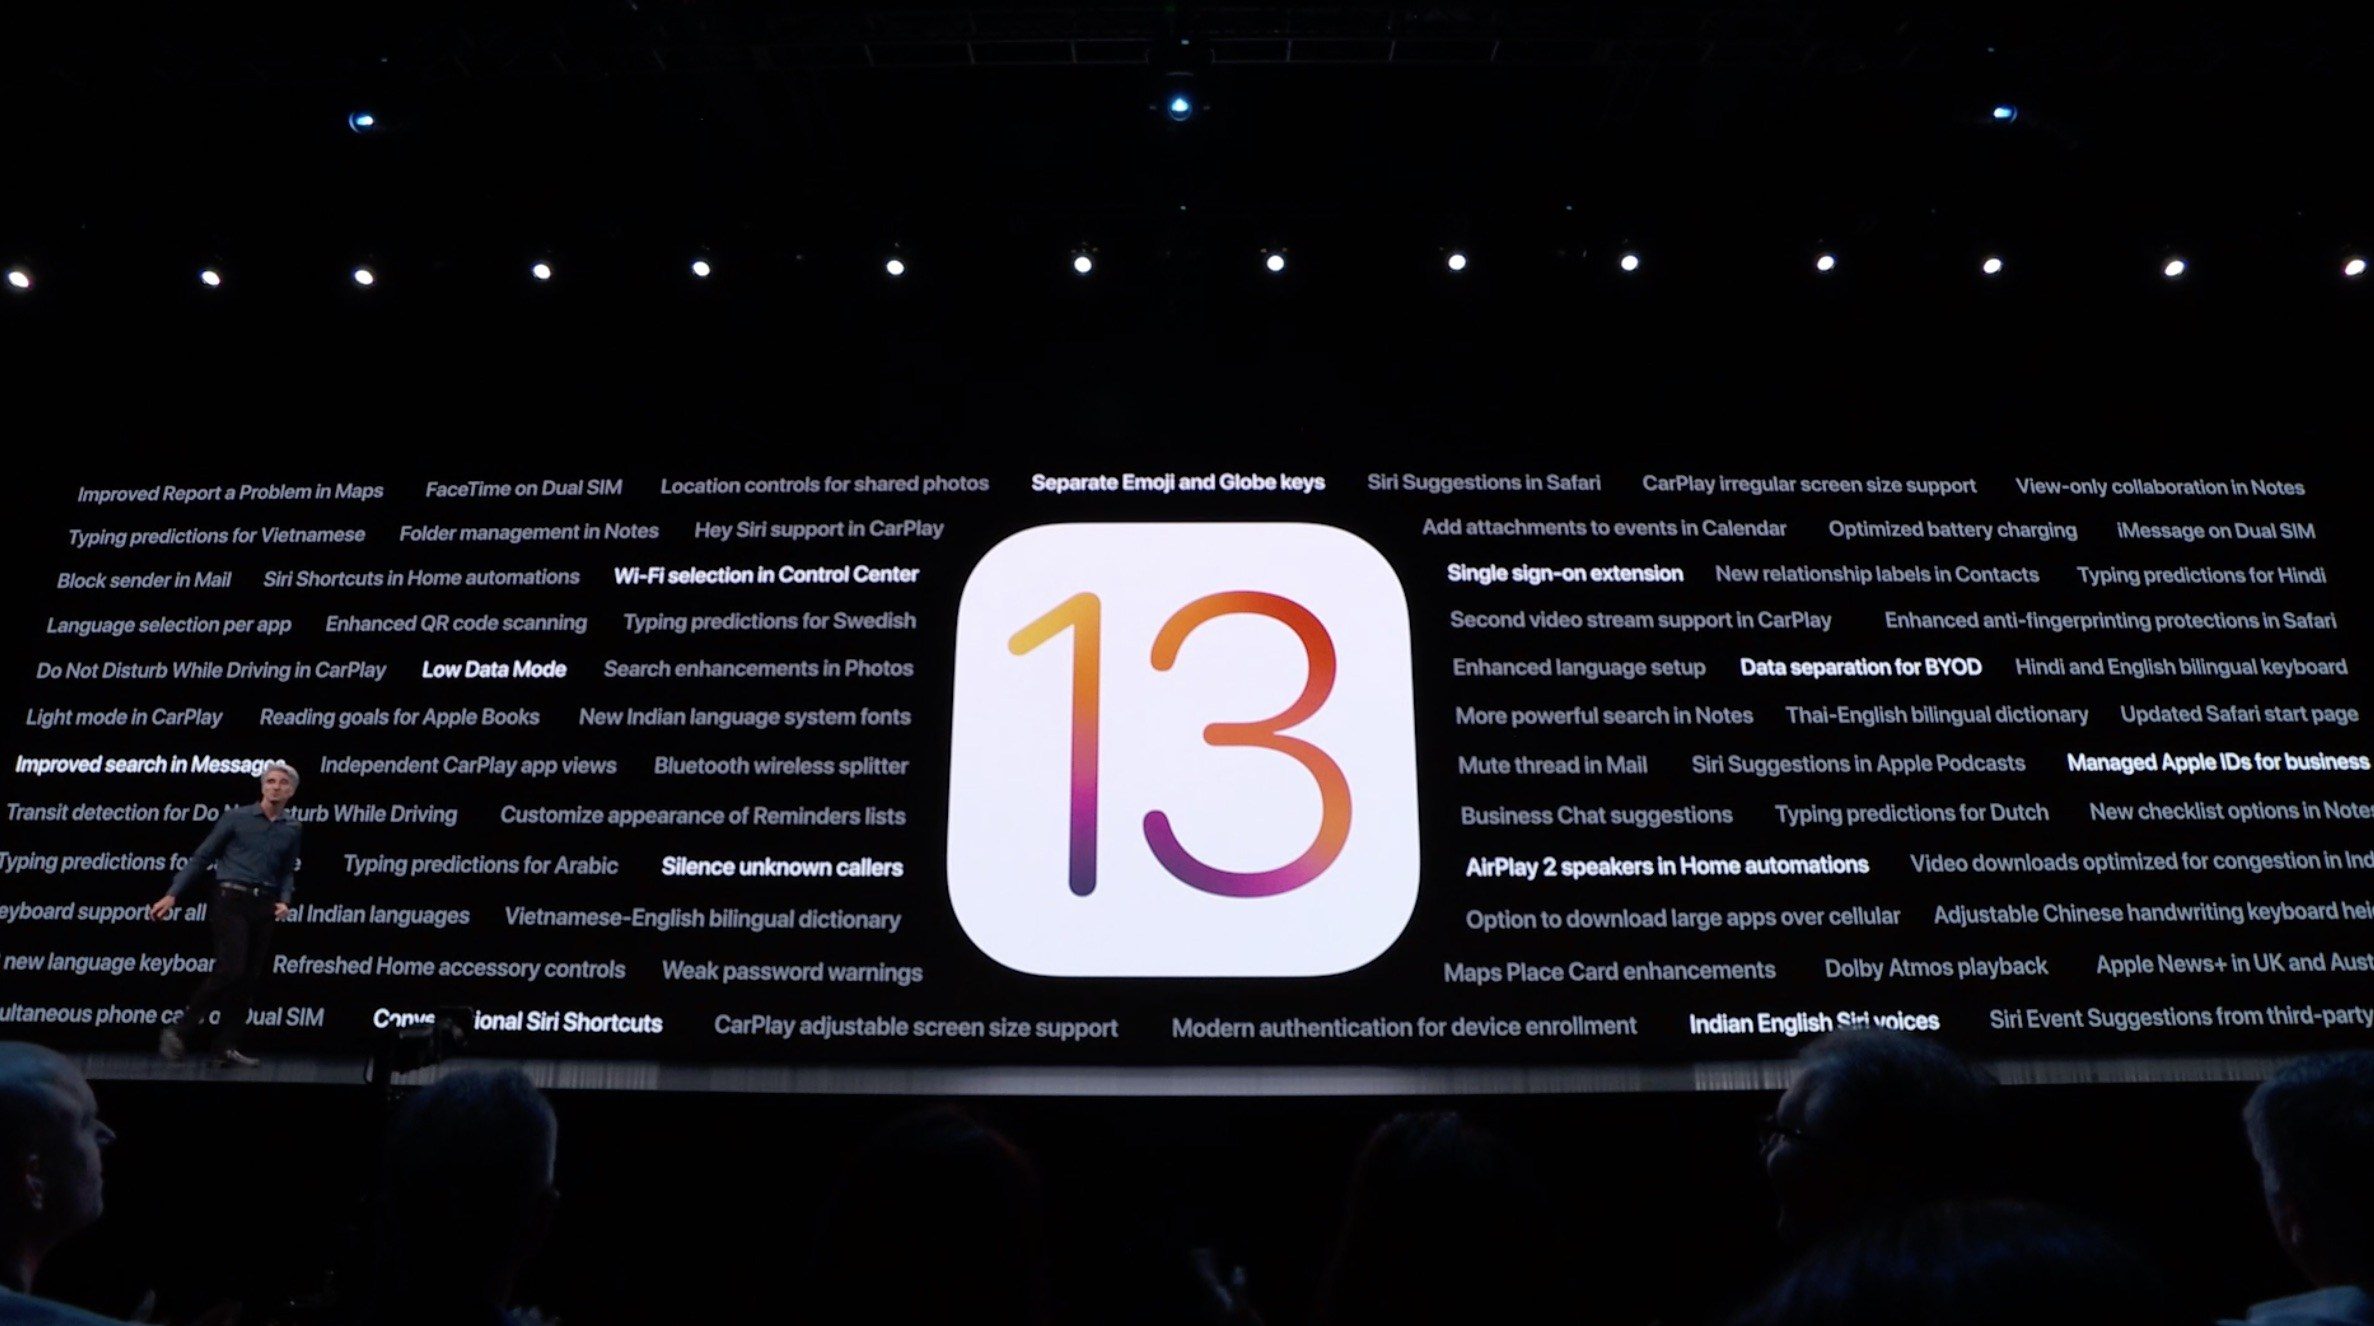 Why You Shouldn’t Install iOS 13 and the Other Betas Yet